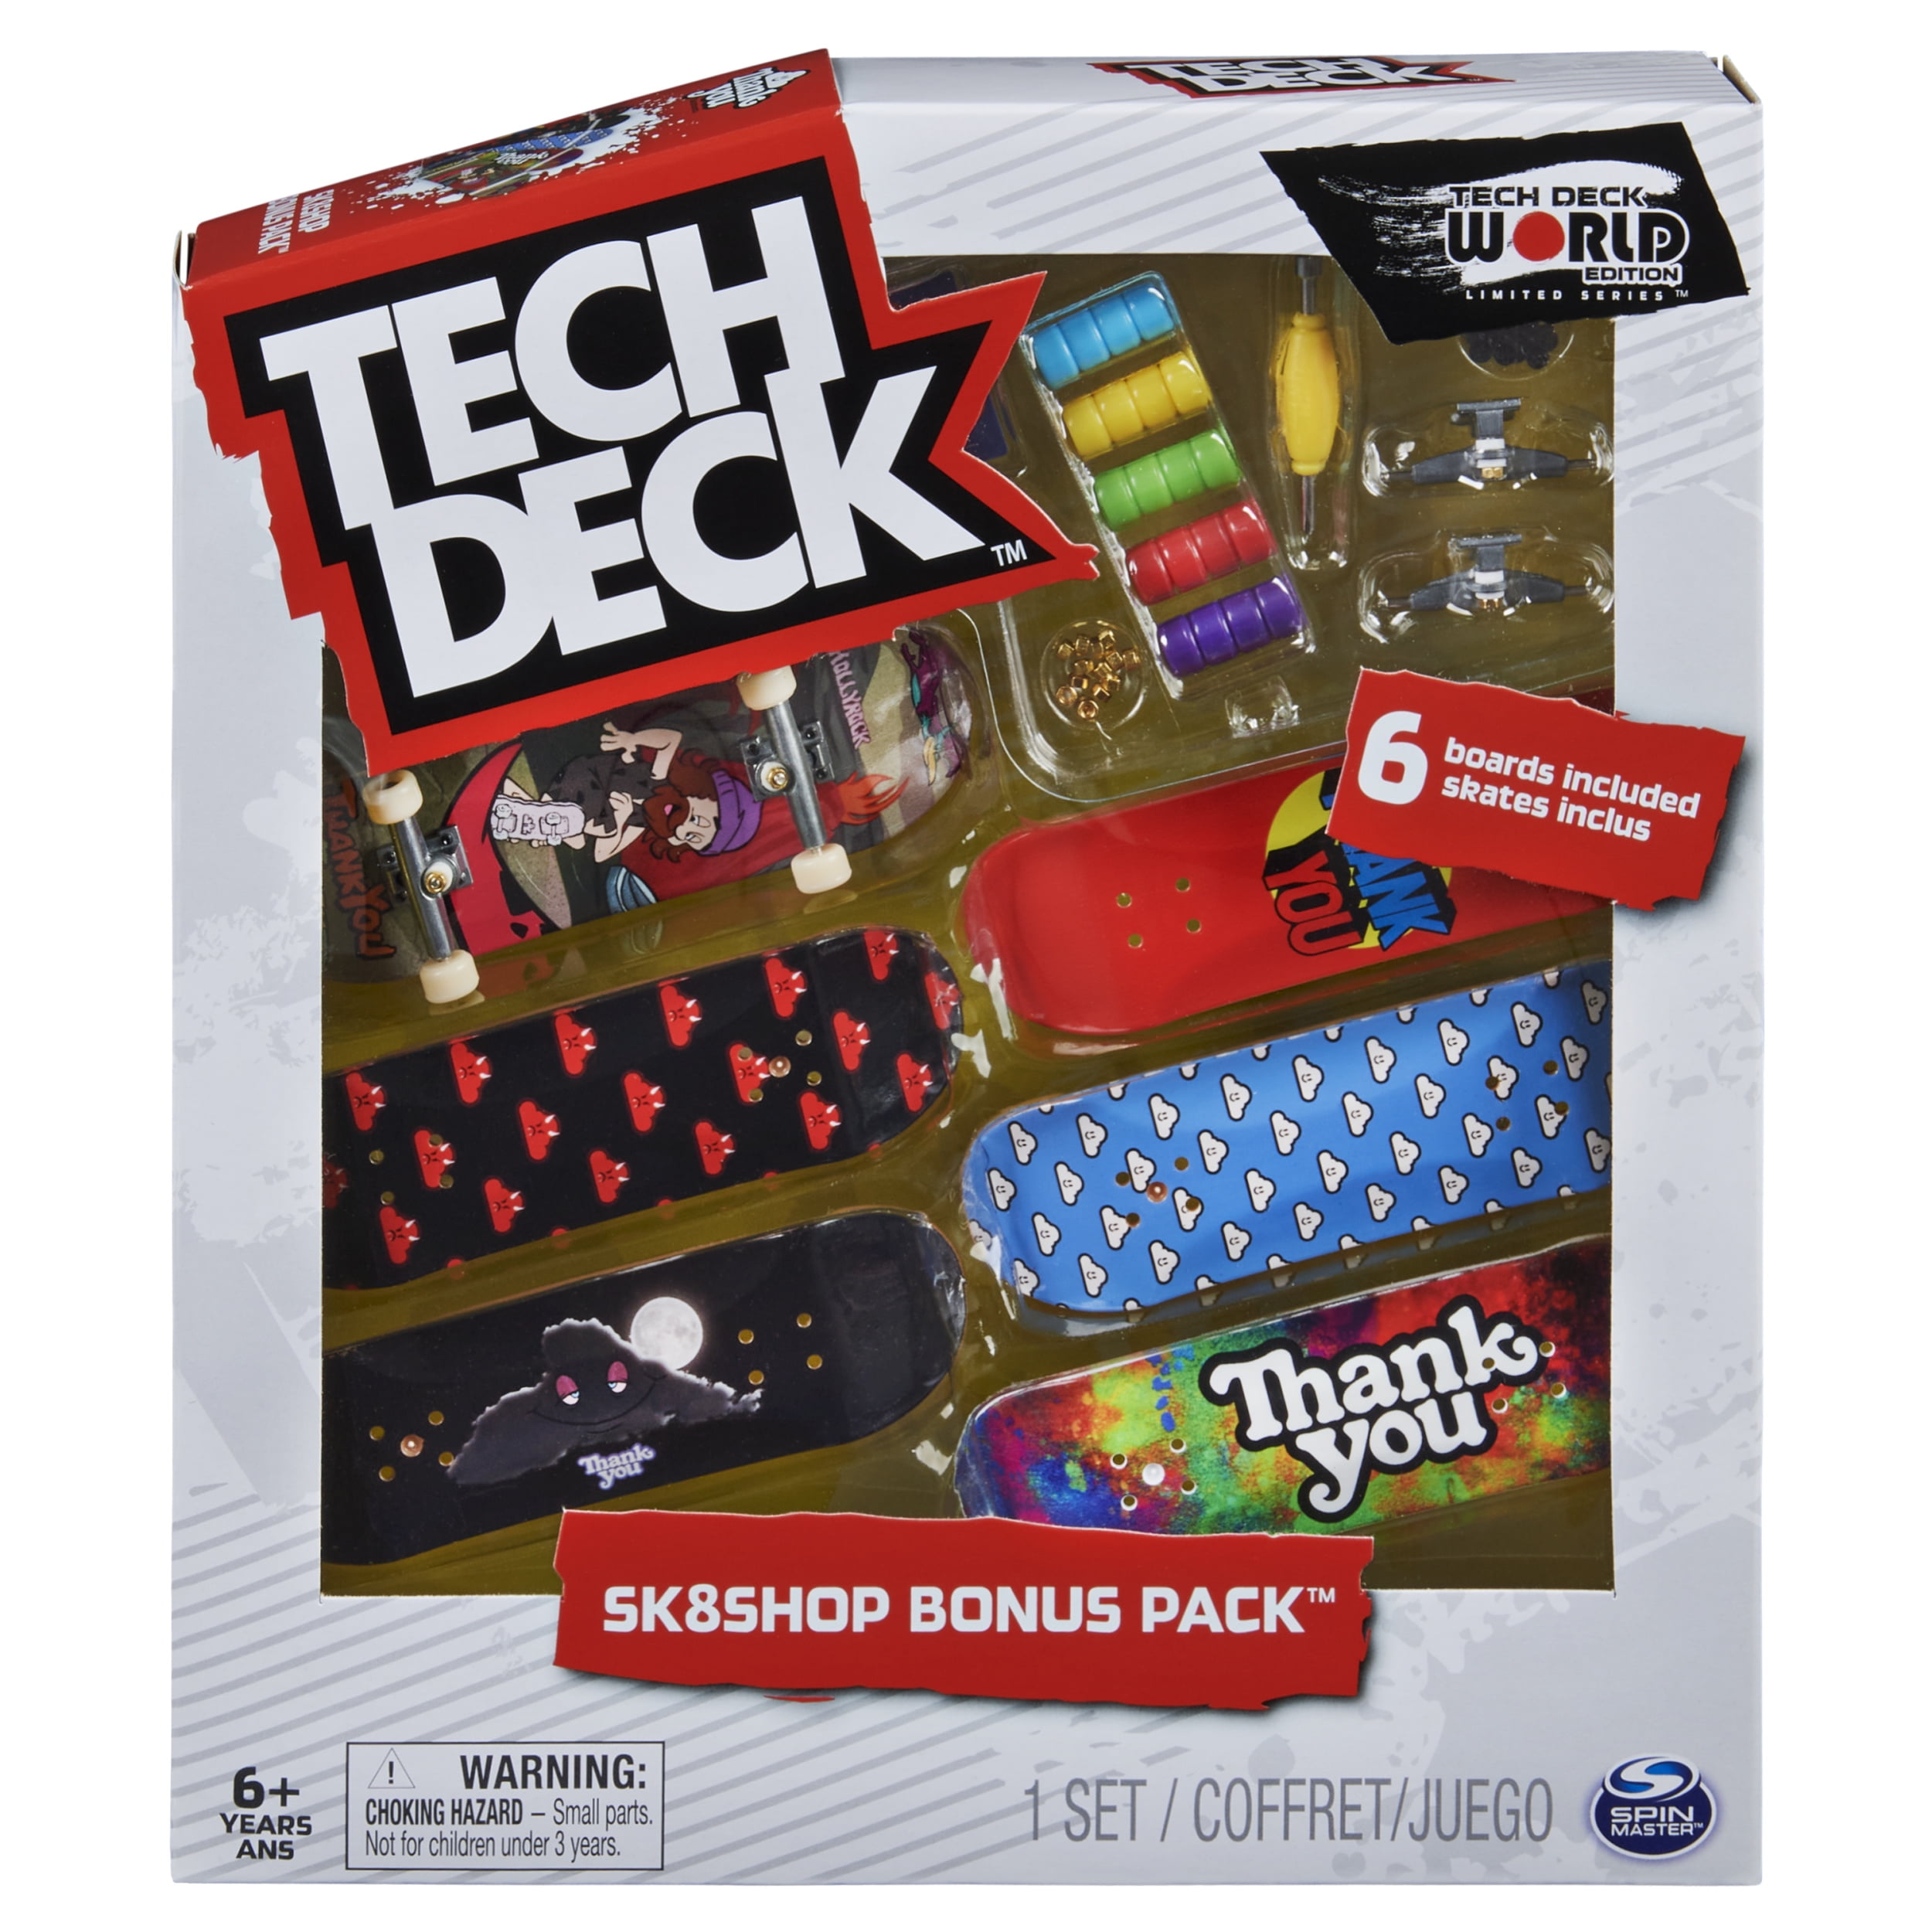 Tech Deck 6 Pack SK8SHOP Bonus Pack Limited World Edition Series NEW FREE SHIP